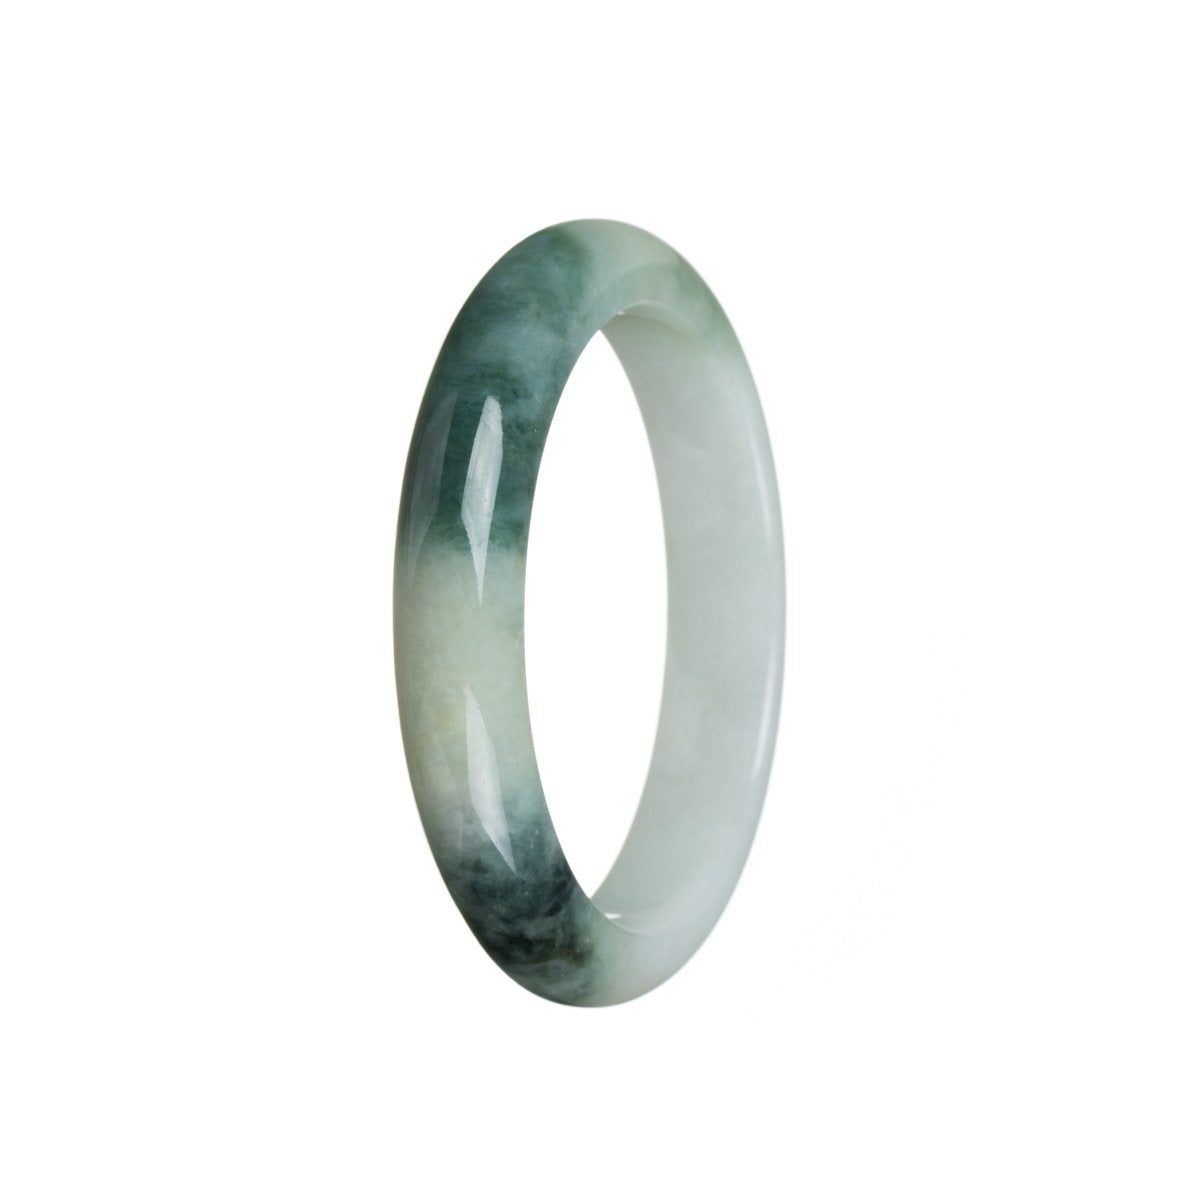 A close-up photo of a bangle bracelet made of genuine grade A white Burma Jade. The bracelet has a semi-round shape and measures 55mm in diameter. It features a beautiful green flower design on the surface. This piece of jewelry is sold by MAYS.